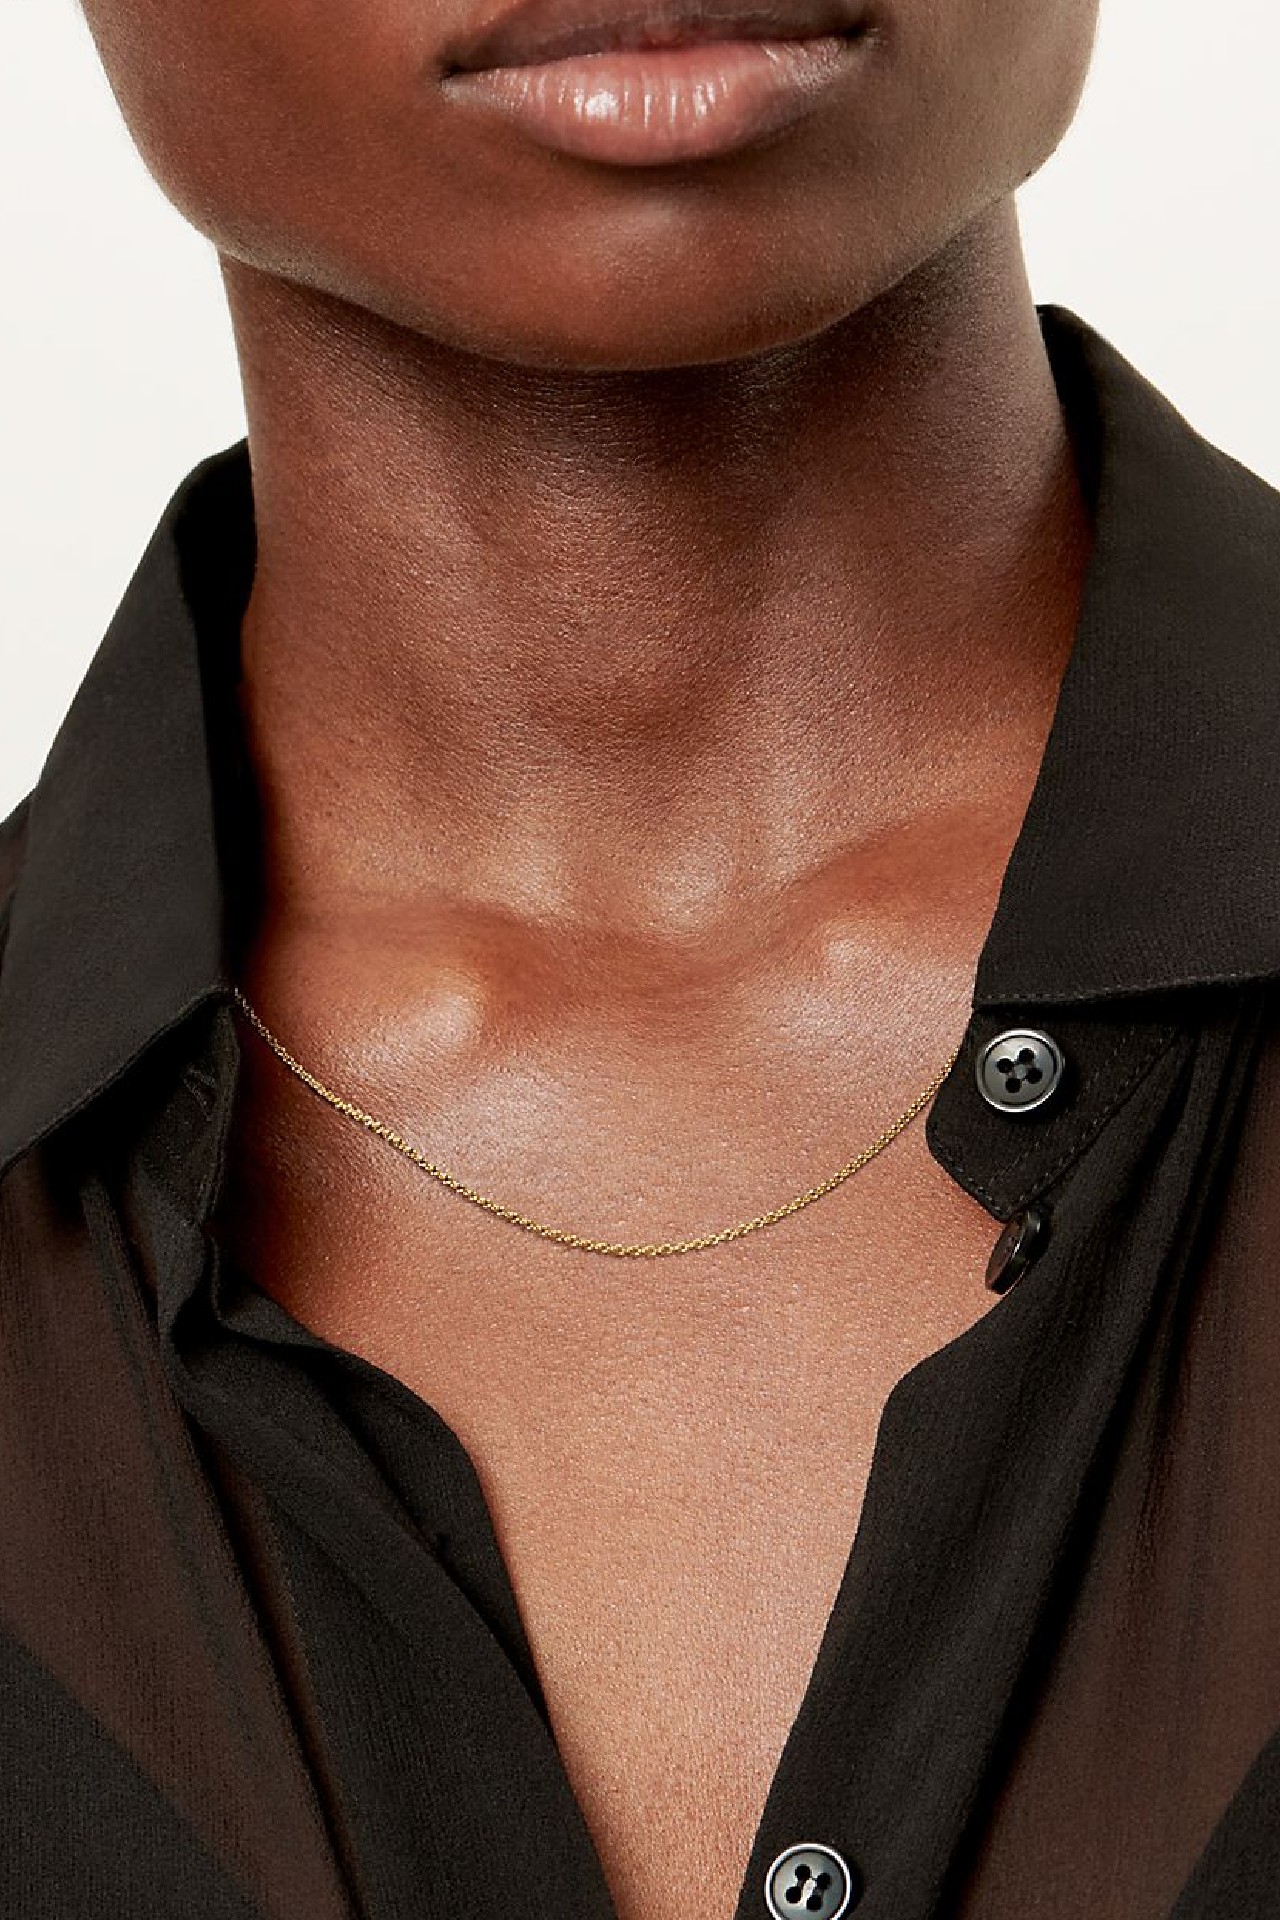 The Best Gold Chain Necklace Brands For Women - Vogue Australia